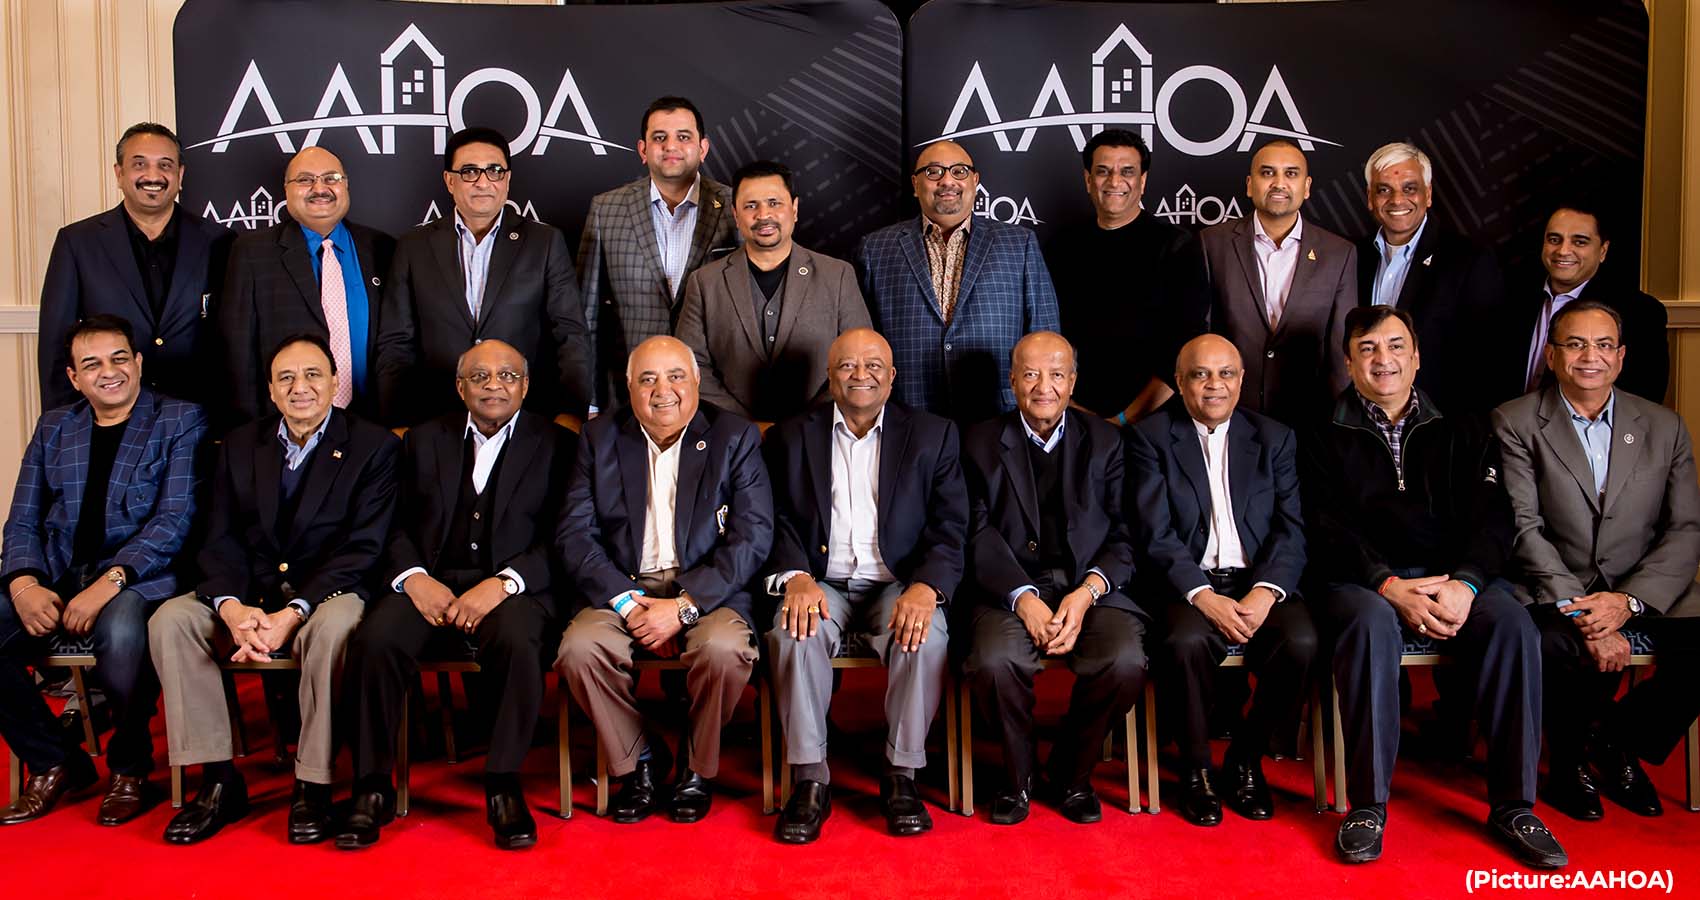 Nishant (Neal) Patel Becomes Youngest Chairman in AAHOA History